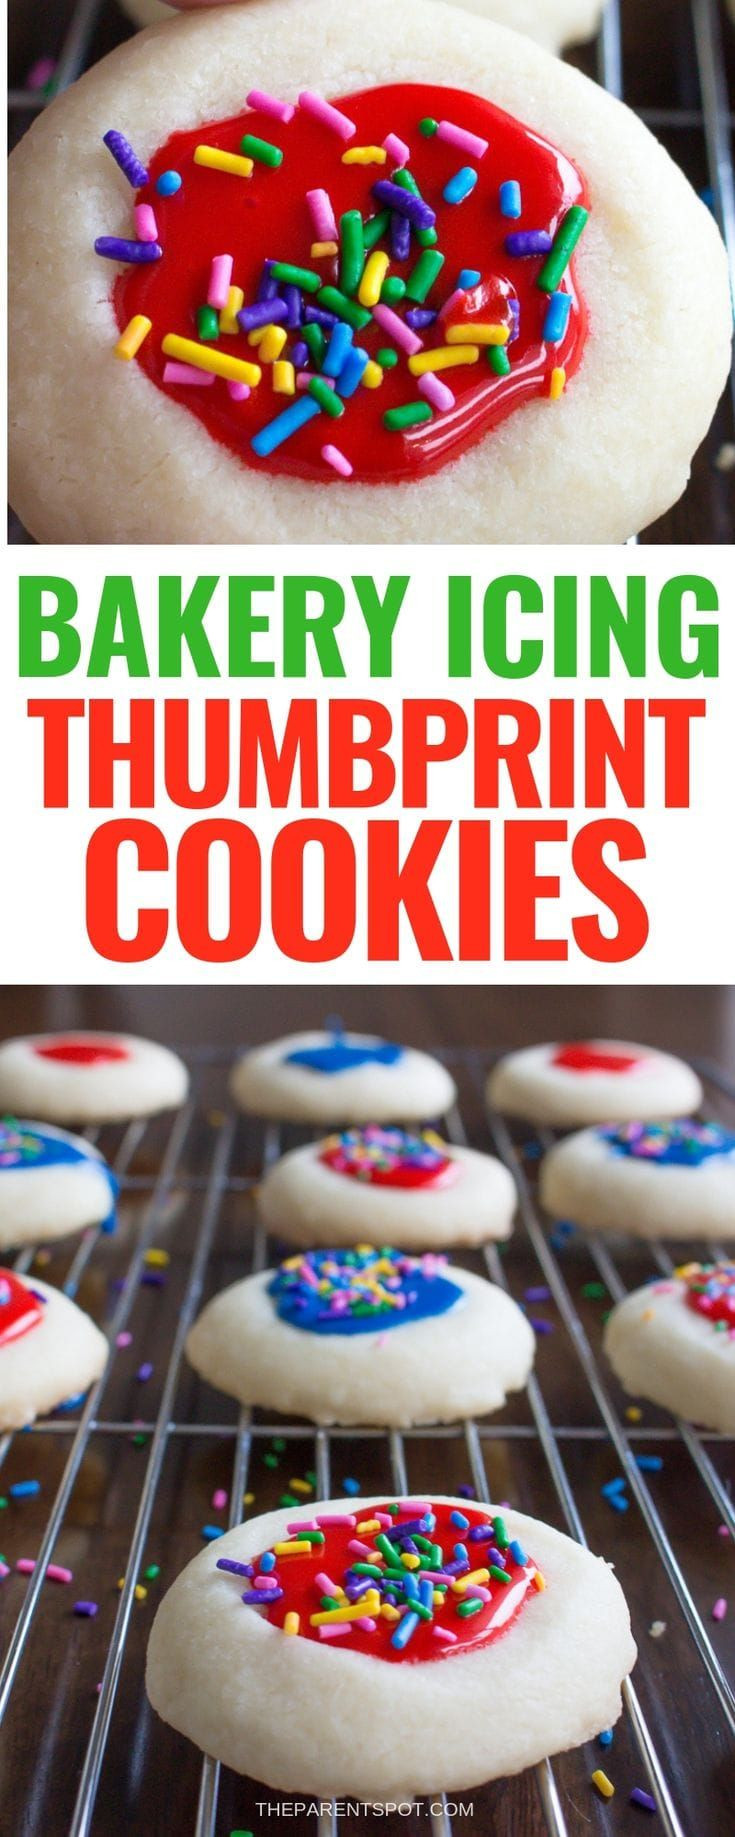 Thumbprint Cookies With Icing
 Easy Thumbprint Cookies with Icing Recipe